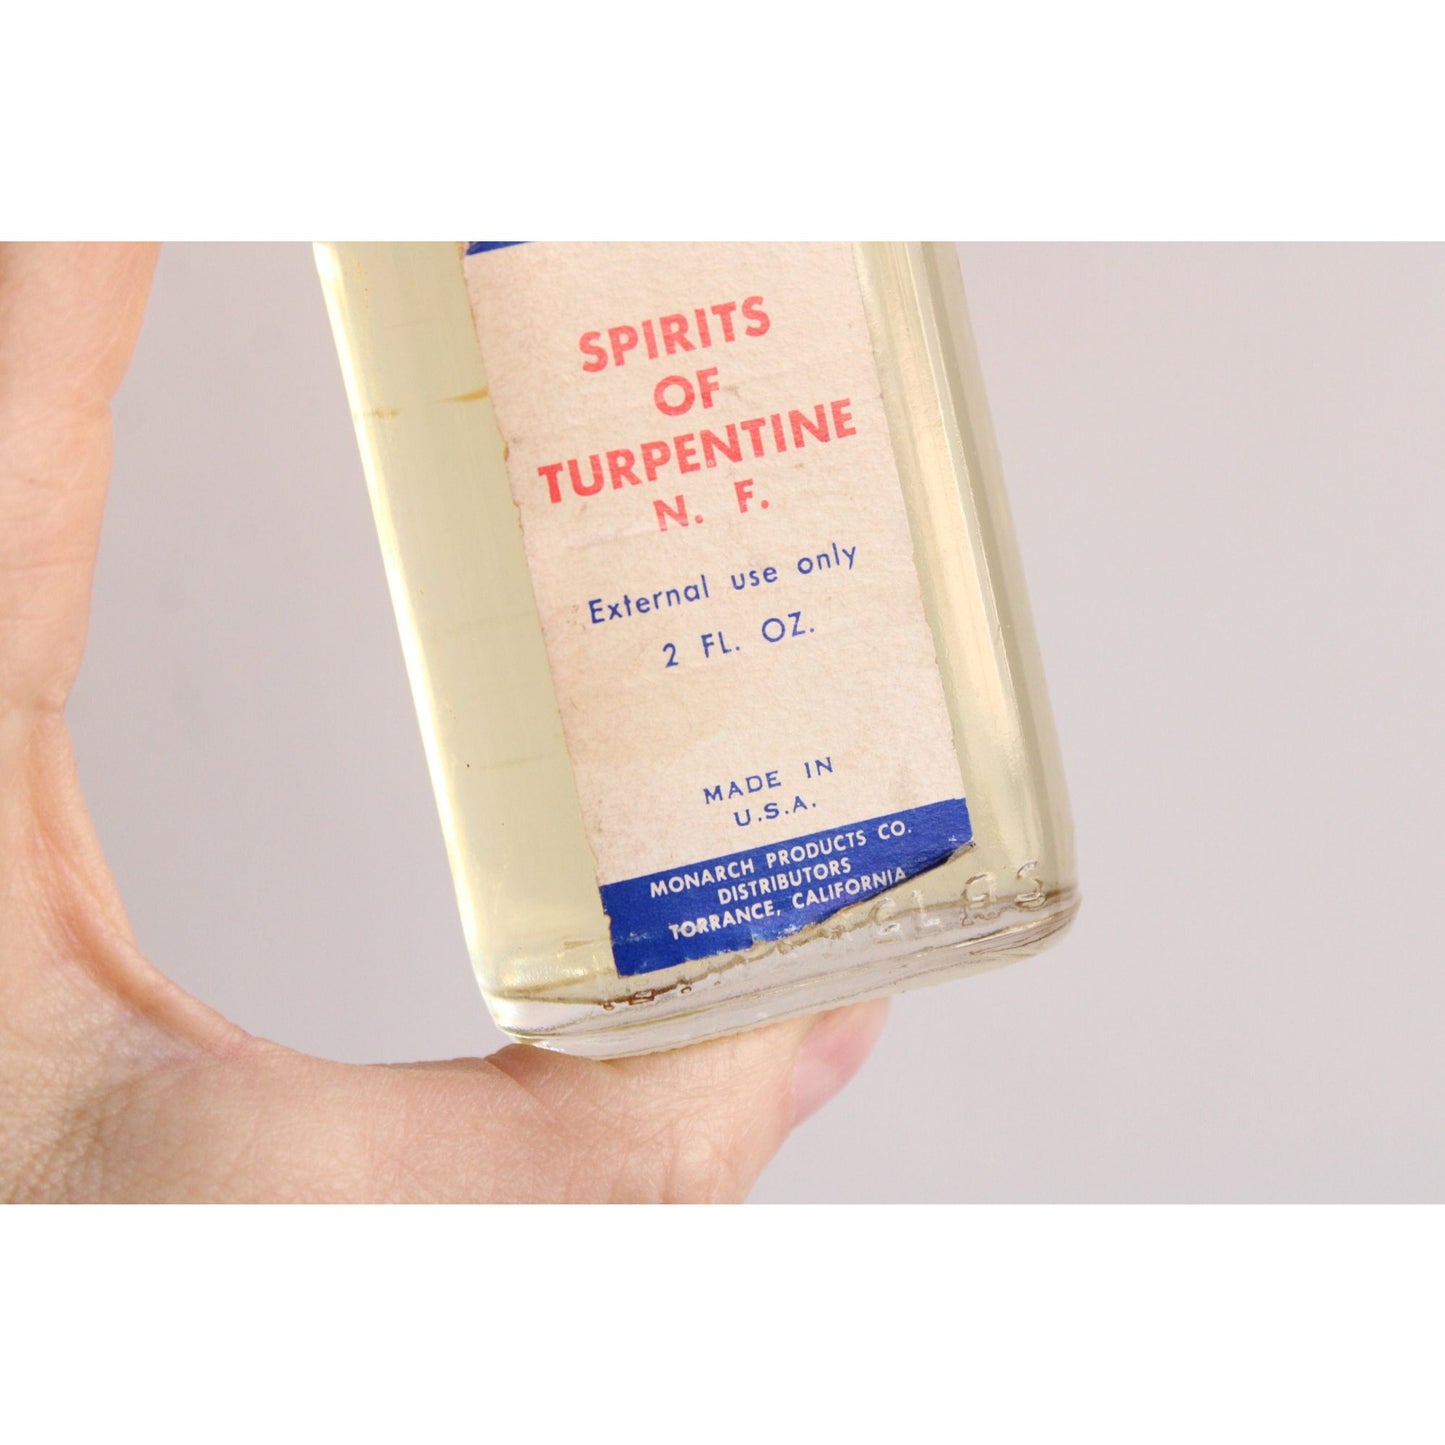 Vintage 1940s 1950s Spirits of Turpentine Glass Apothecary Bottle